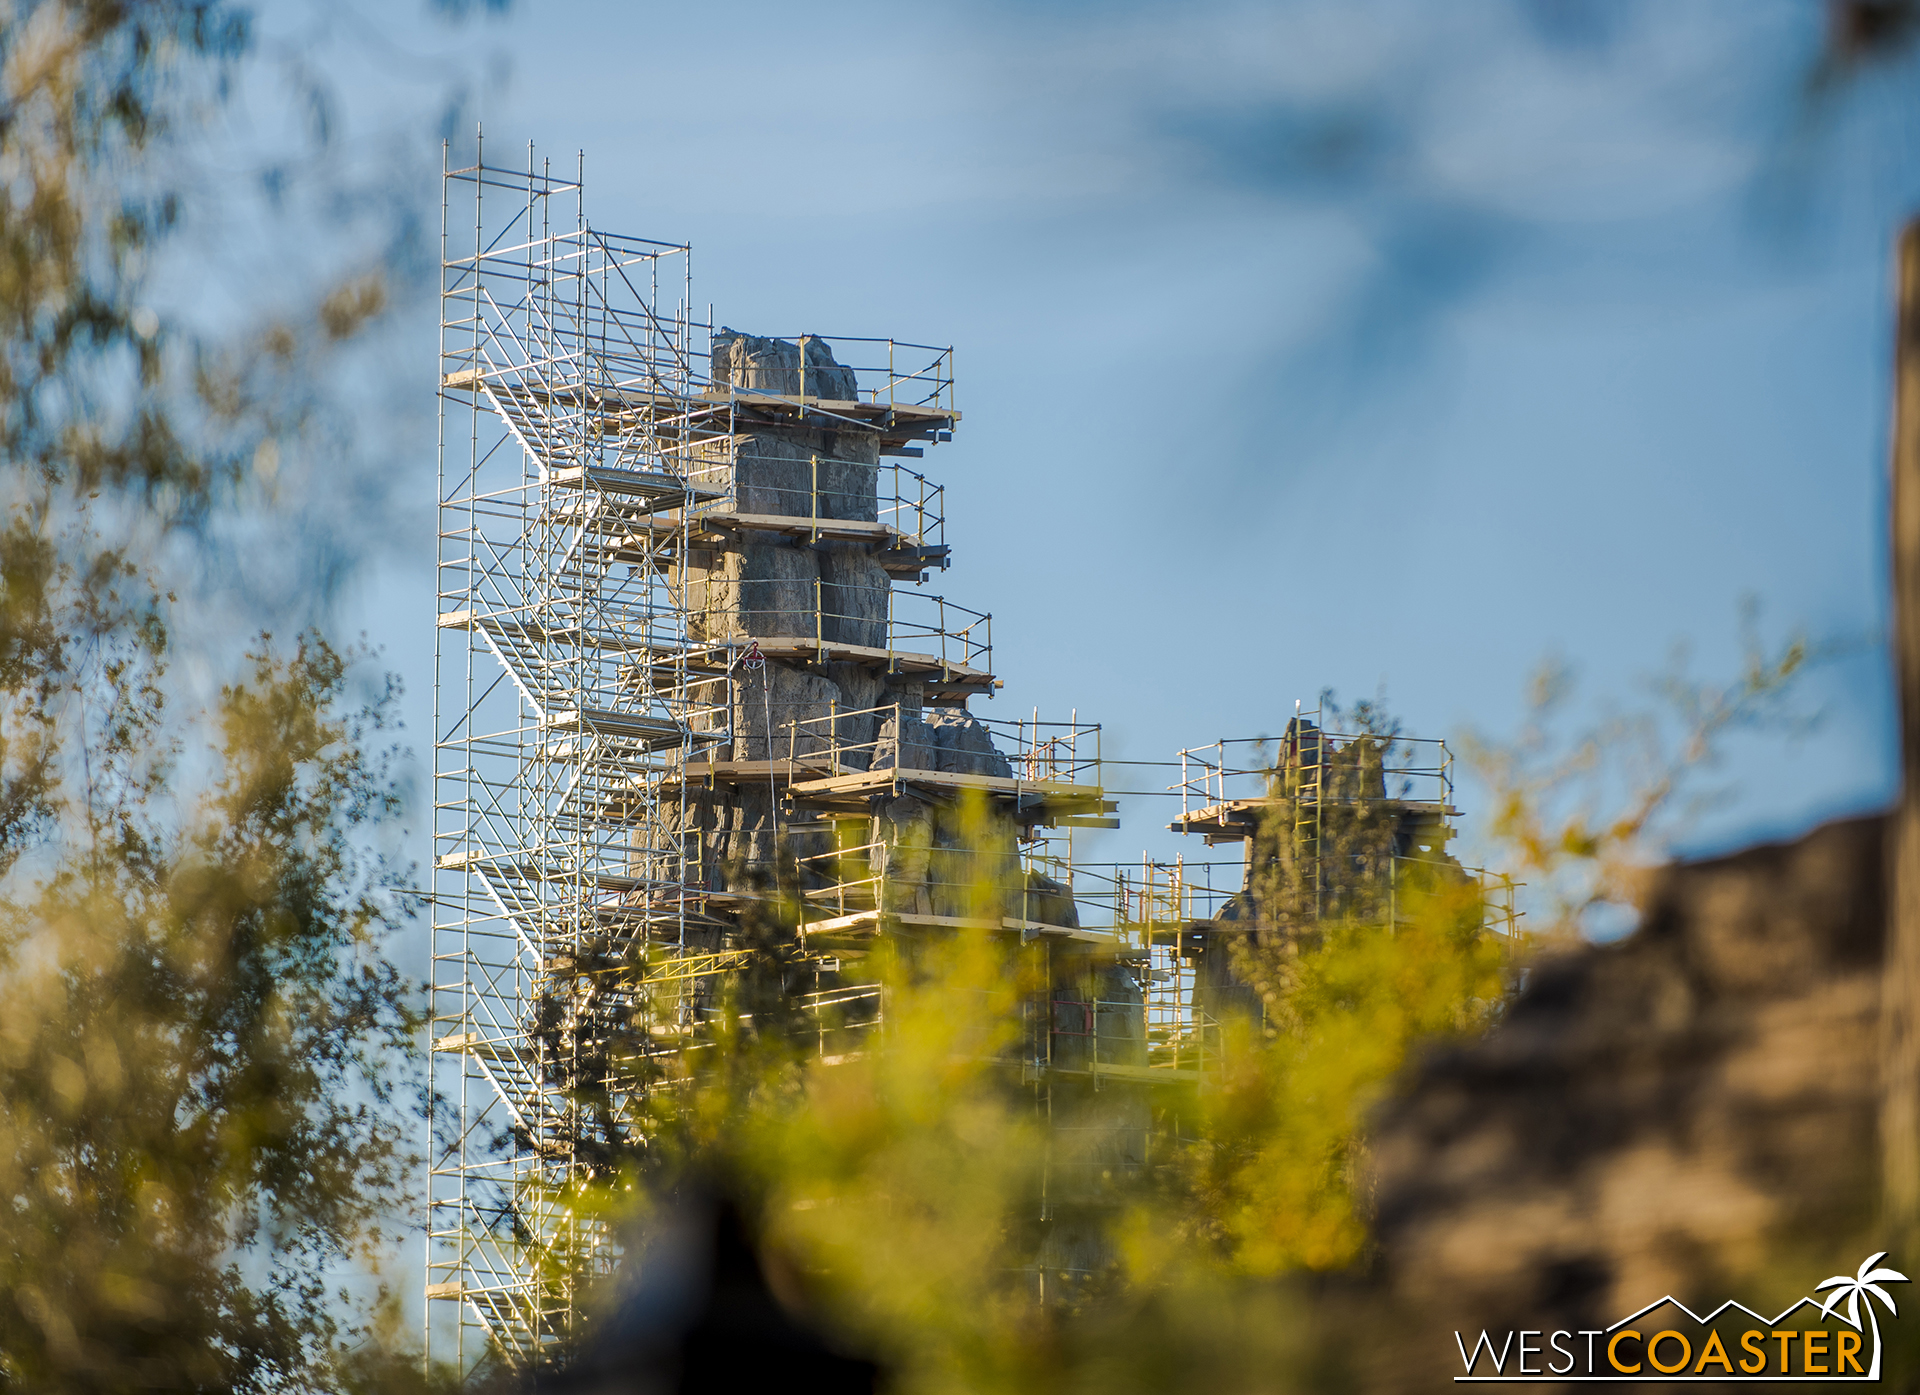  Speaking of Frontierland, here's a glimpse of a Batuu butte (a Batuutte?) from Big Thunder Trail. 